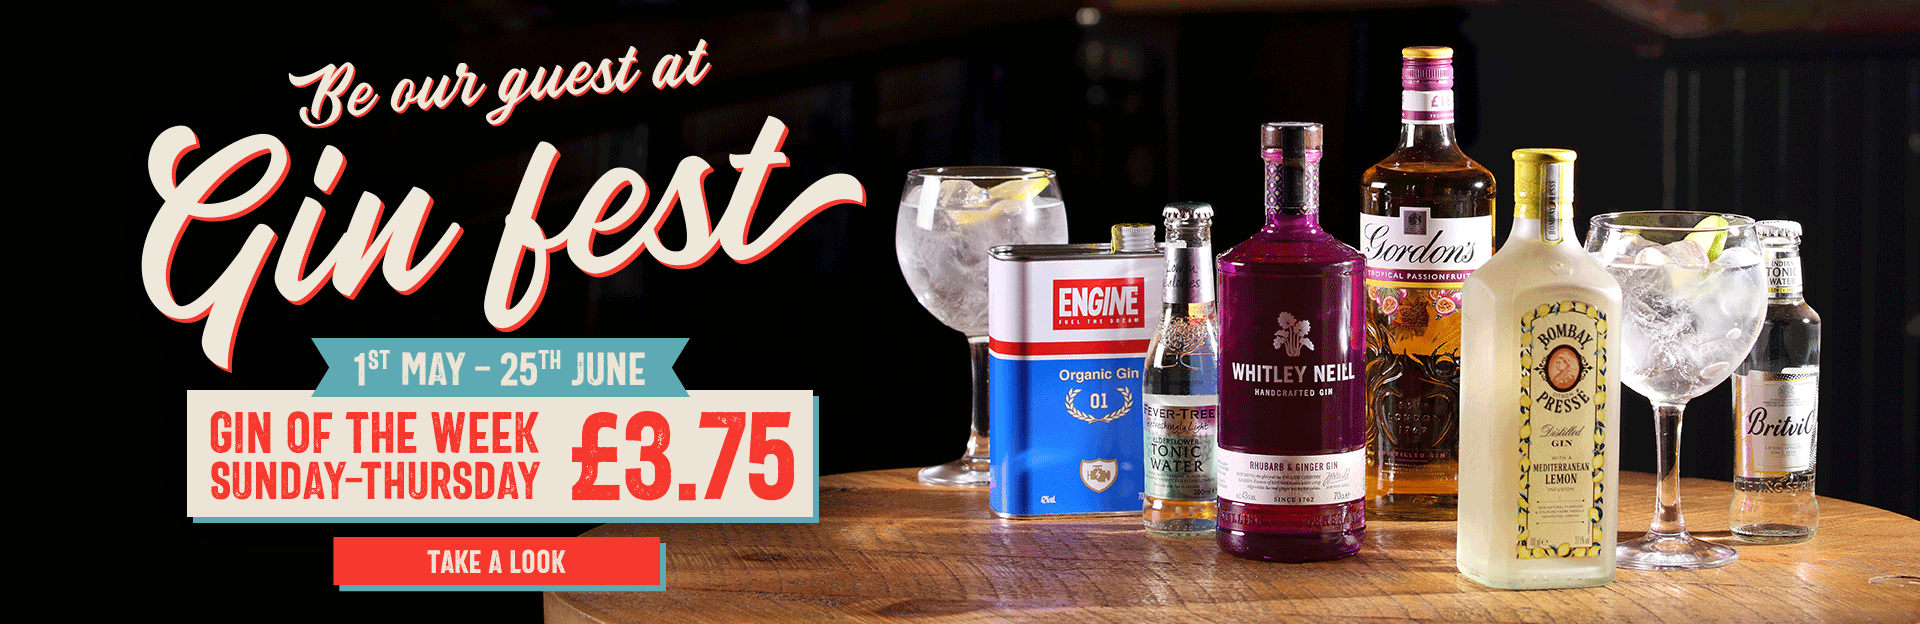 Gin Fest at The Hole in the Wall